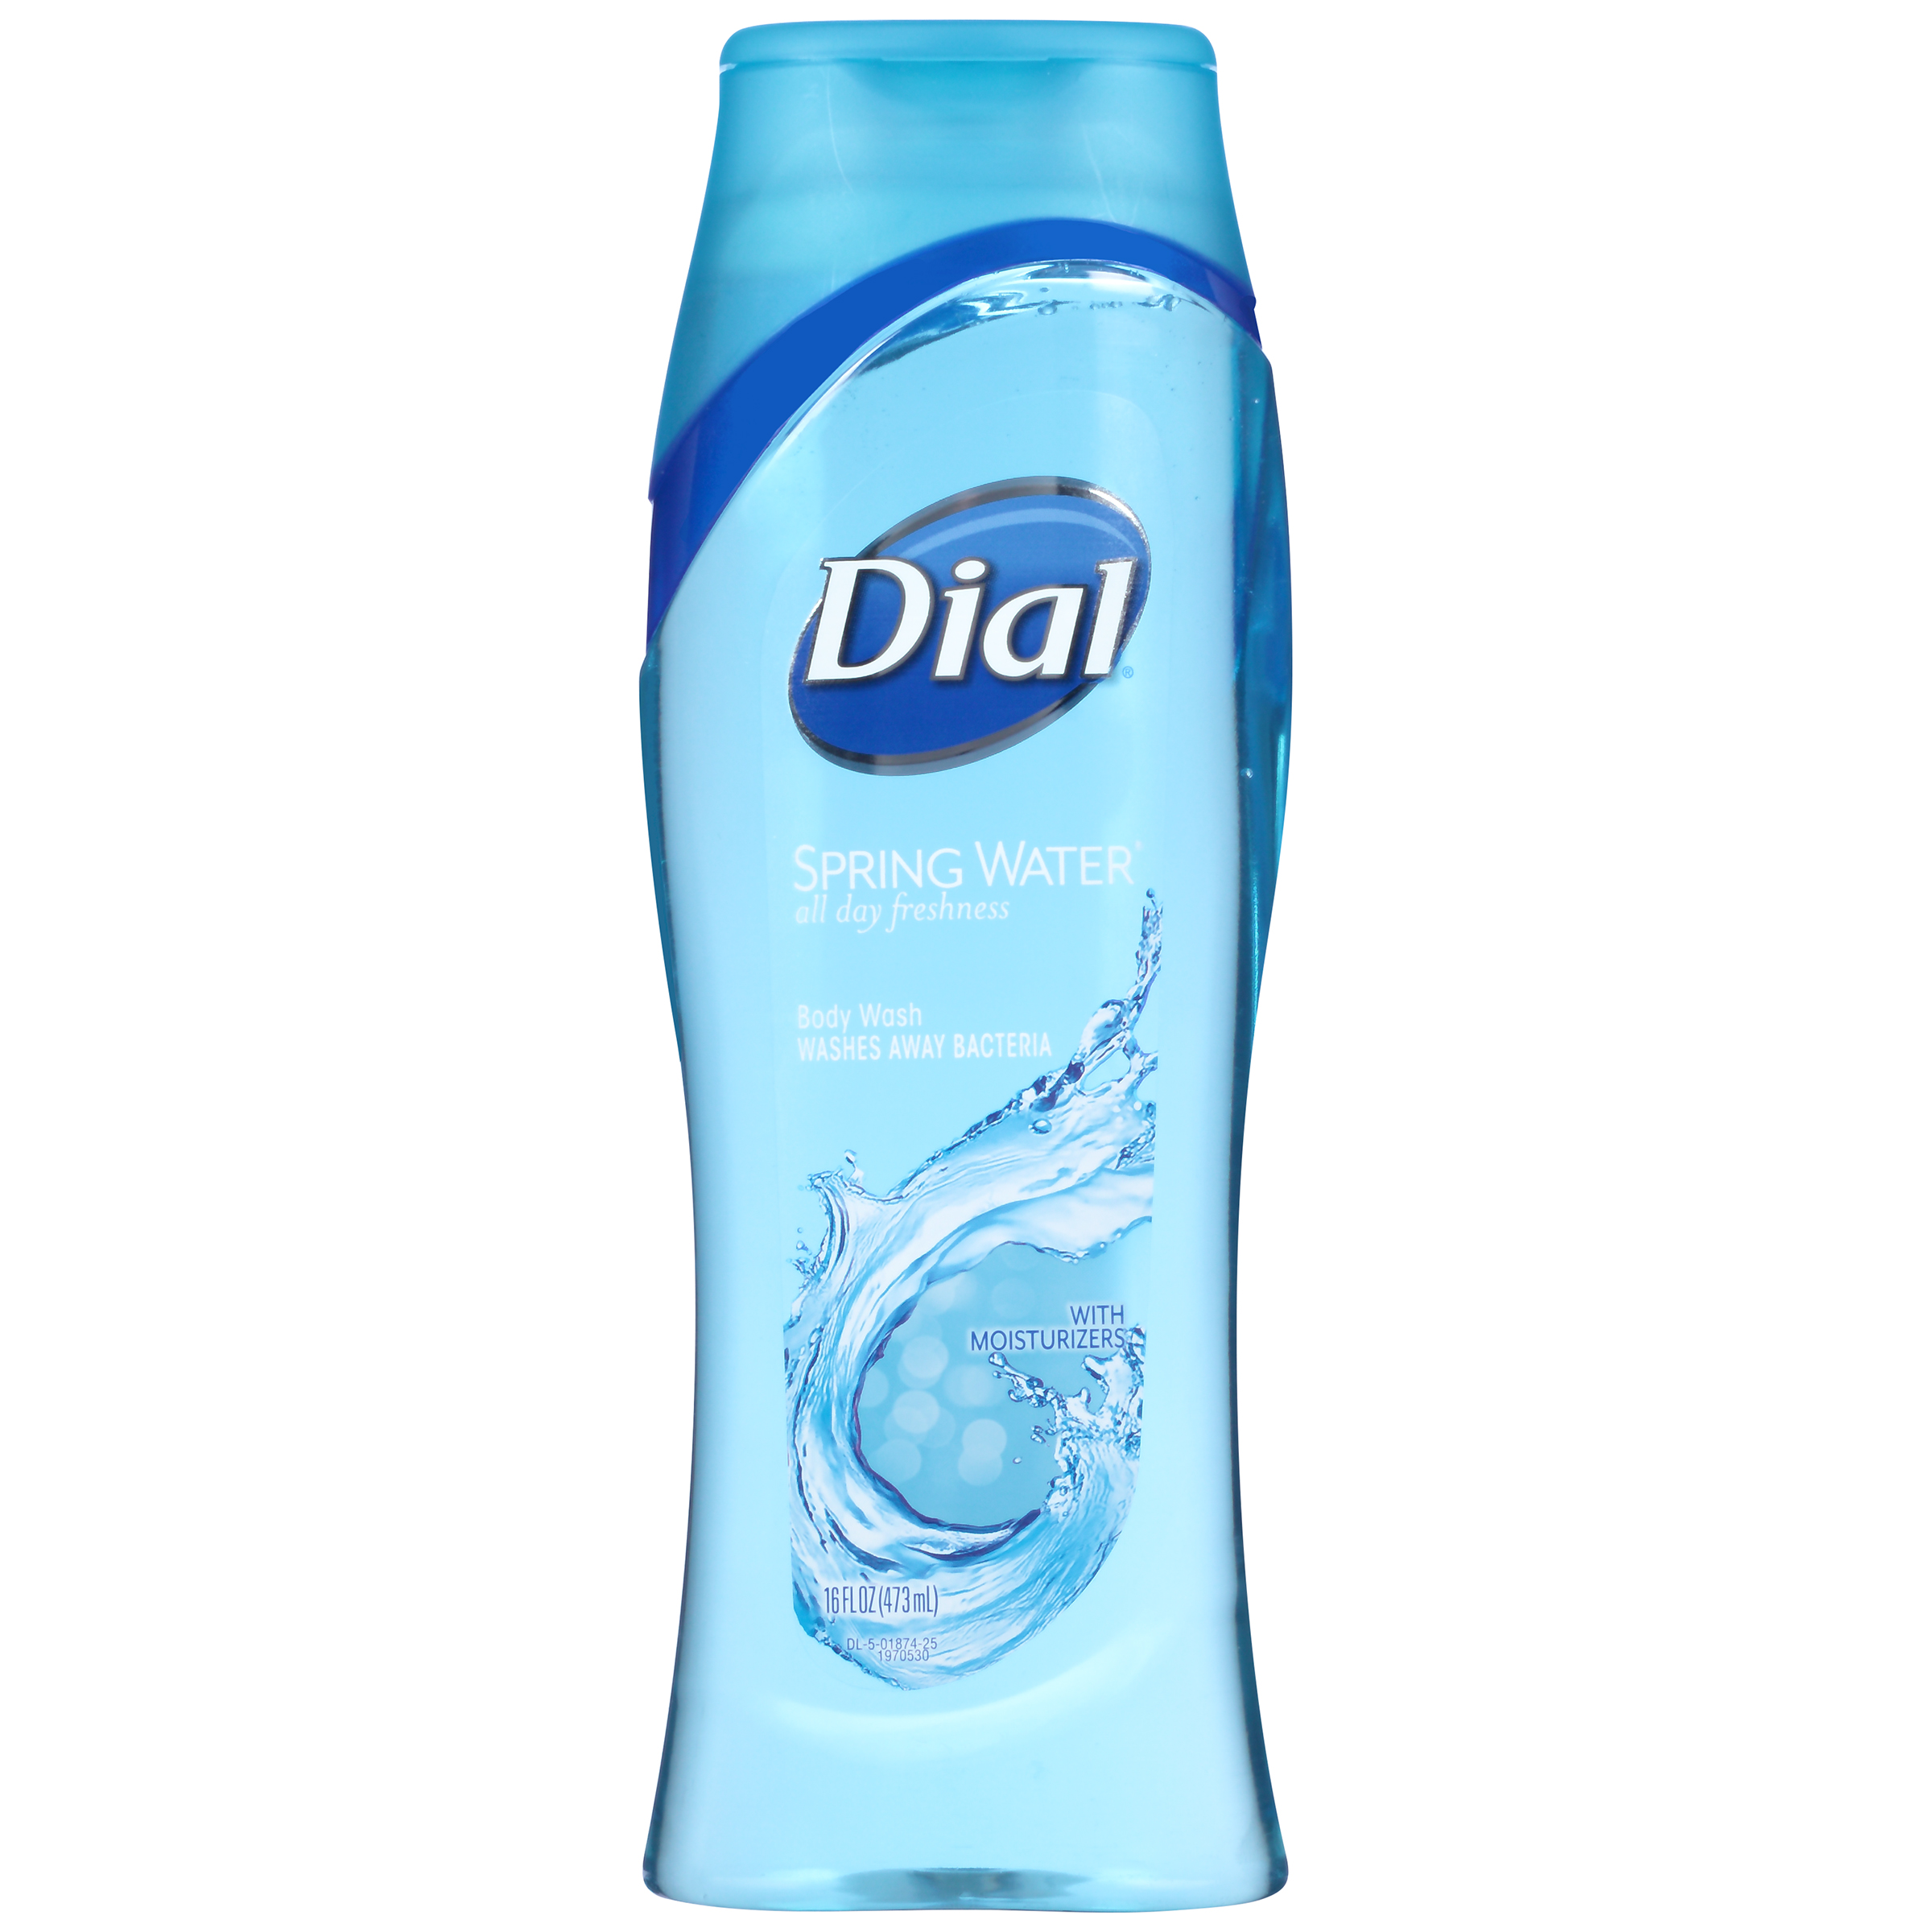 Dial All Day Freshness Body Wash, Antibacterial with Moisturizers, Spring Water, 18 fl oz (532 ml)